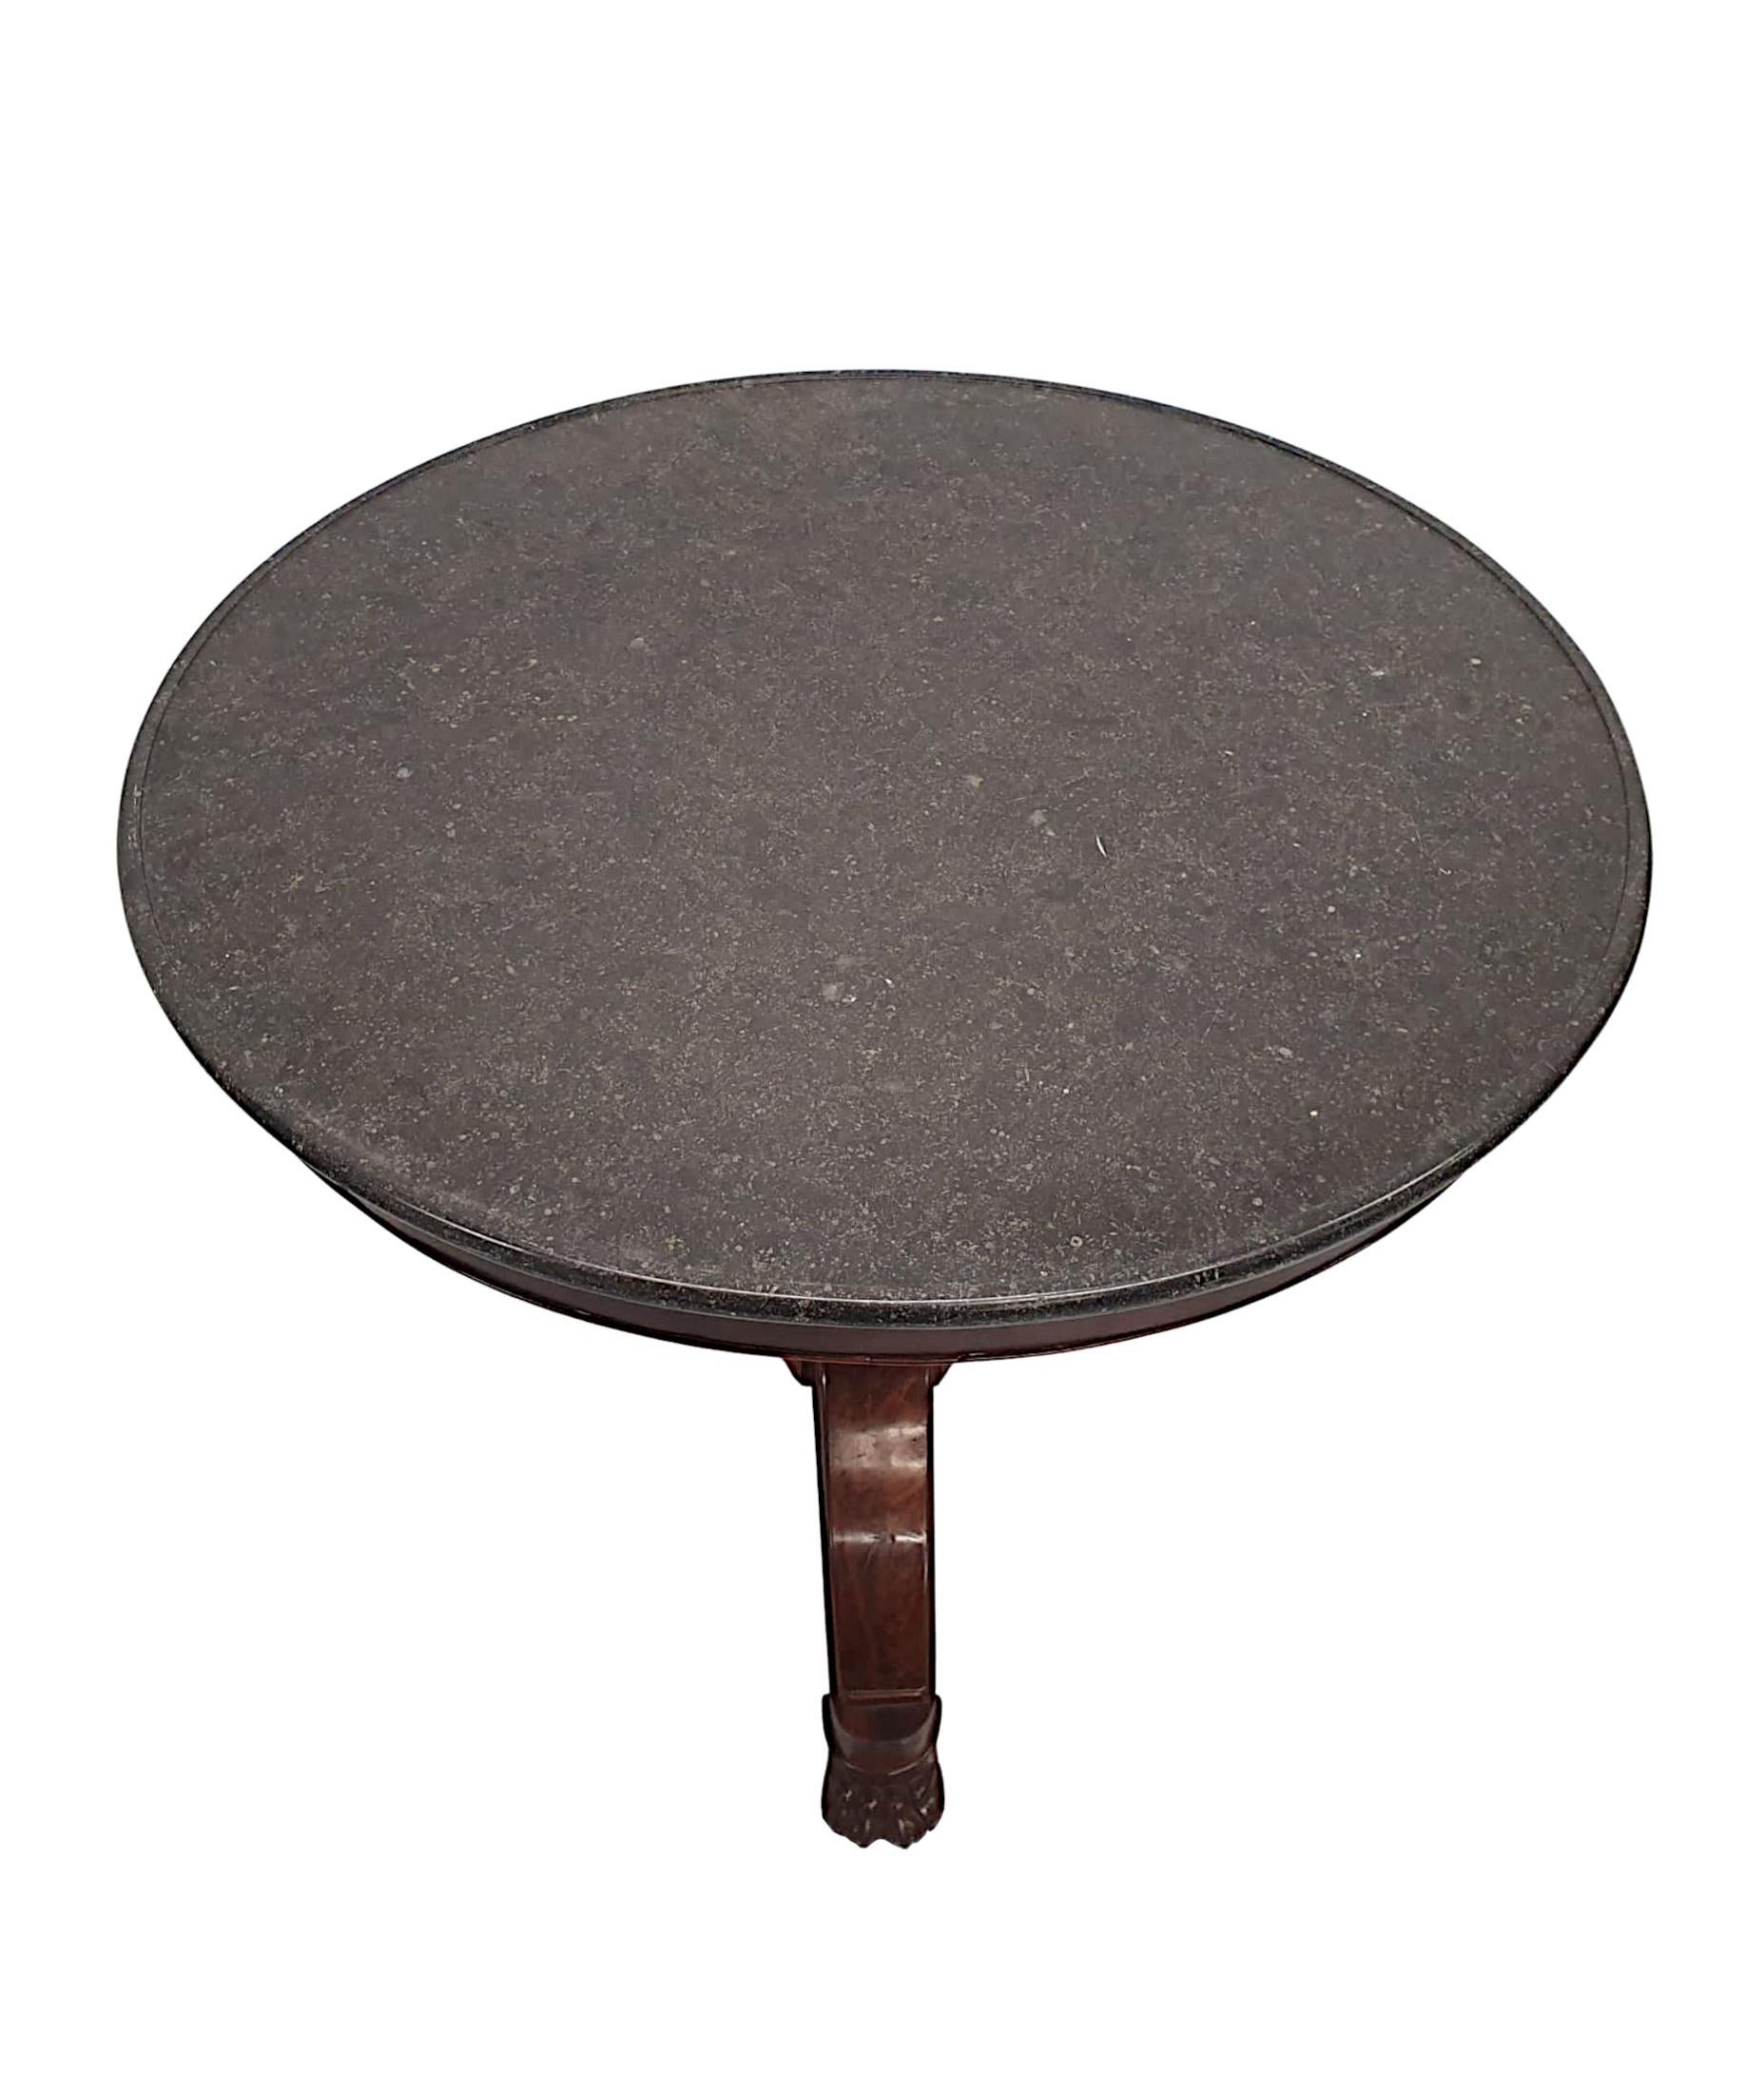 A superb 19th century mahogany marble top centre table, finely hand carved and of fabulous quality with rich patination and grain. The fabulous moulded emperador marble top of circular form is raised over a beautifully simple frieze, supported on